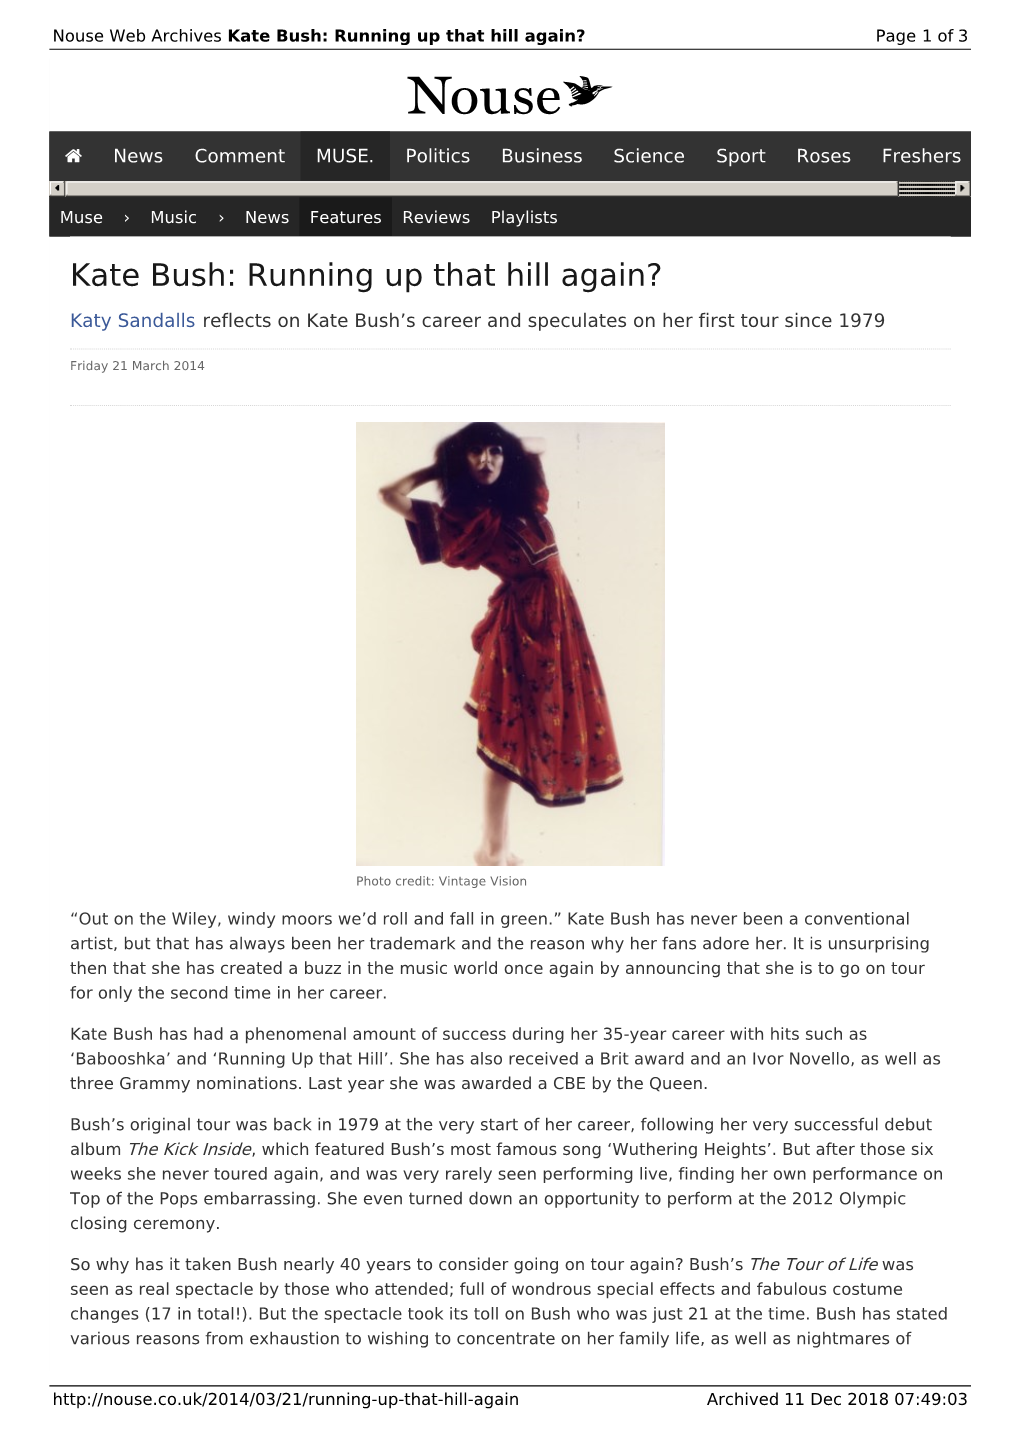 Kate Bush: Running up That Hill Again? | Nouse